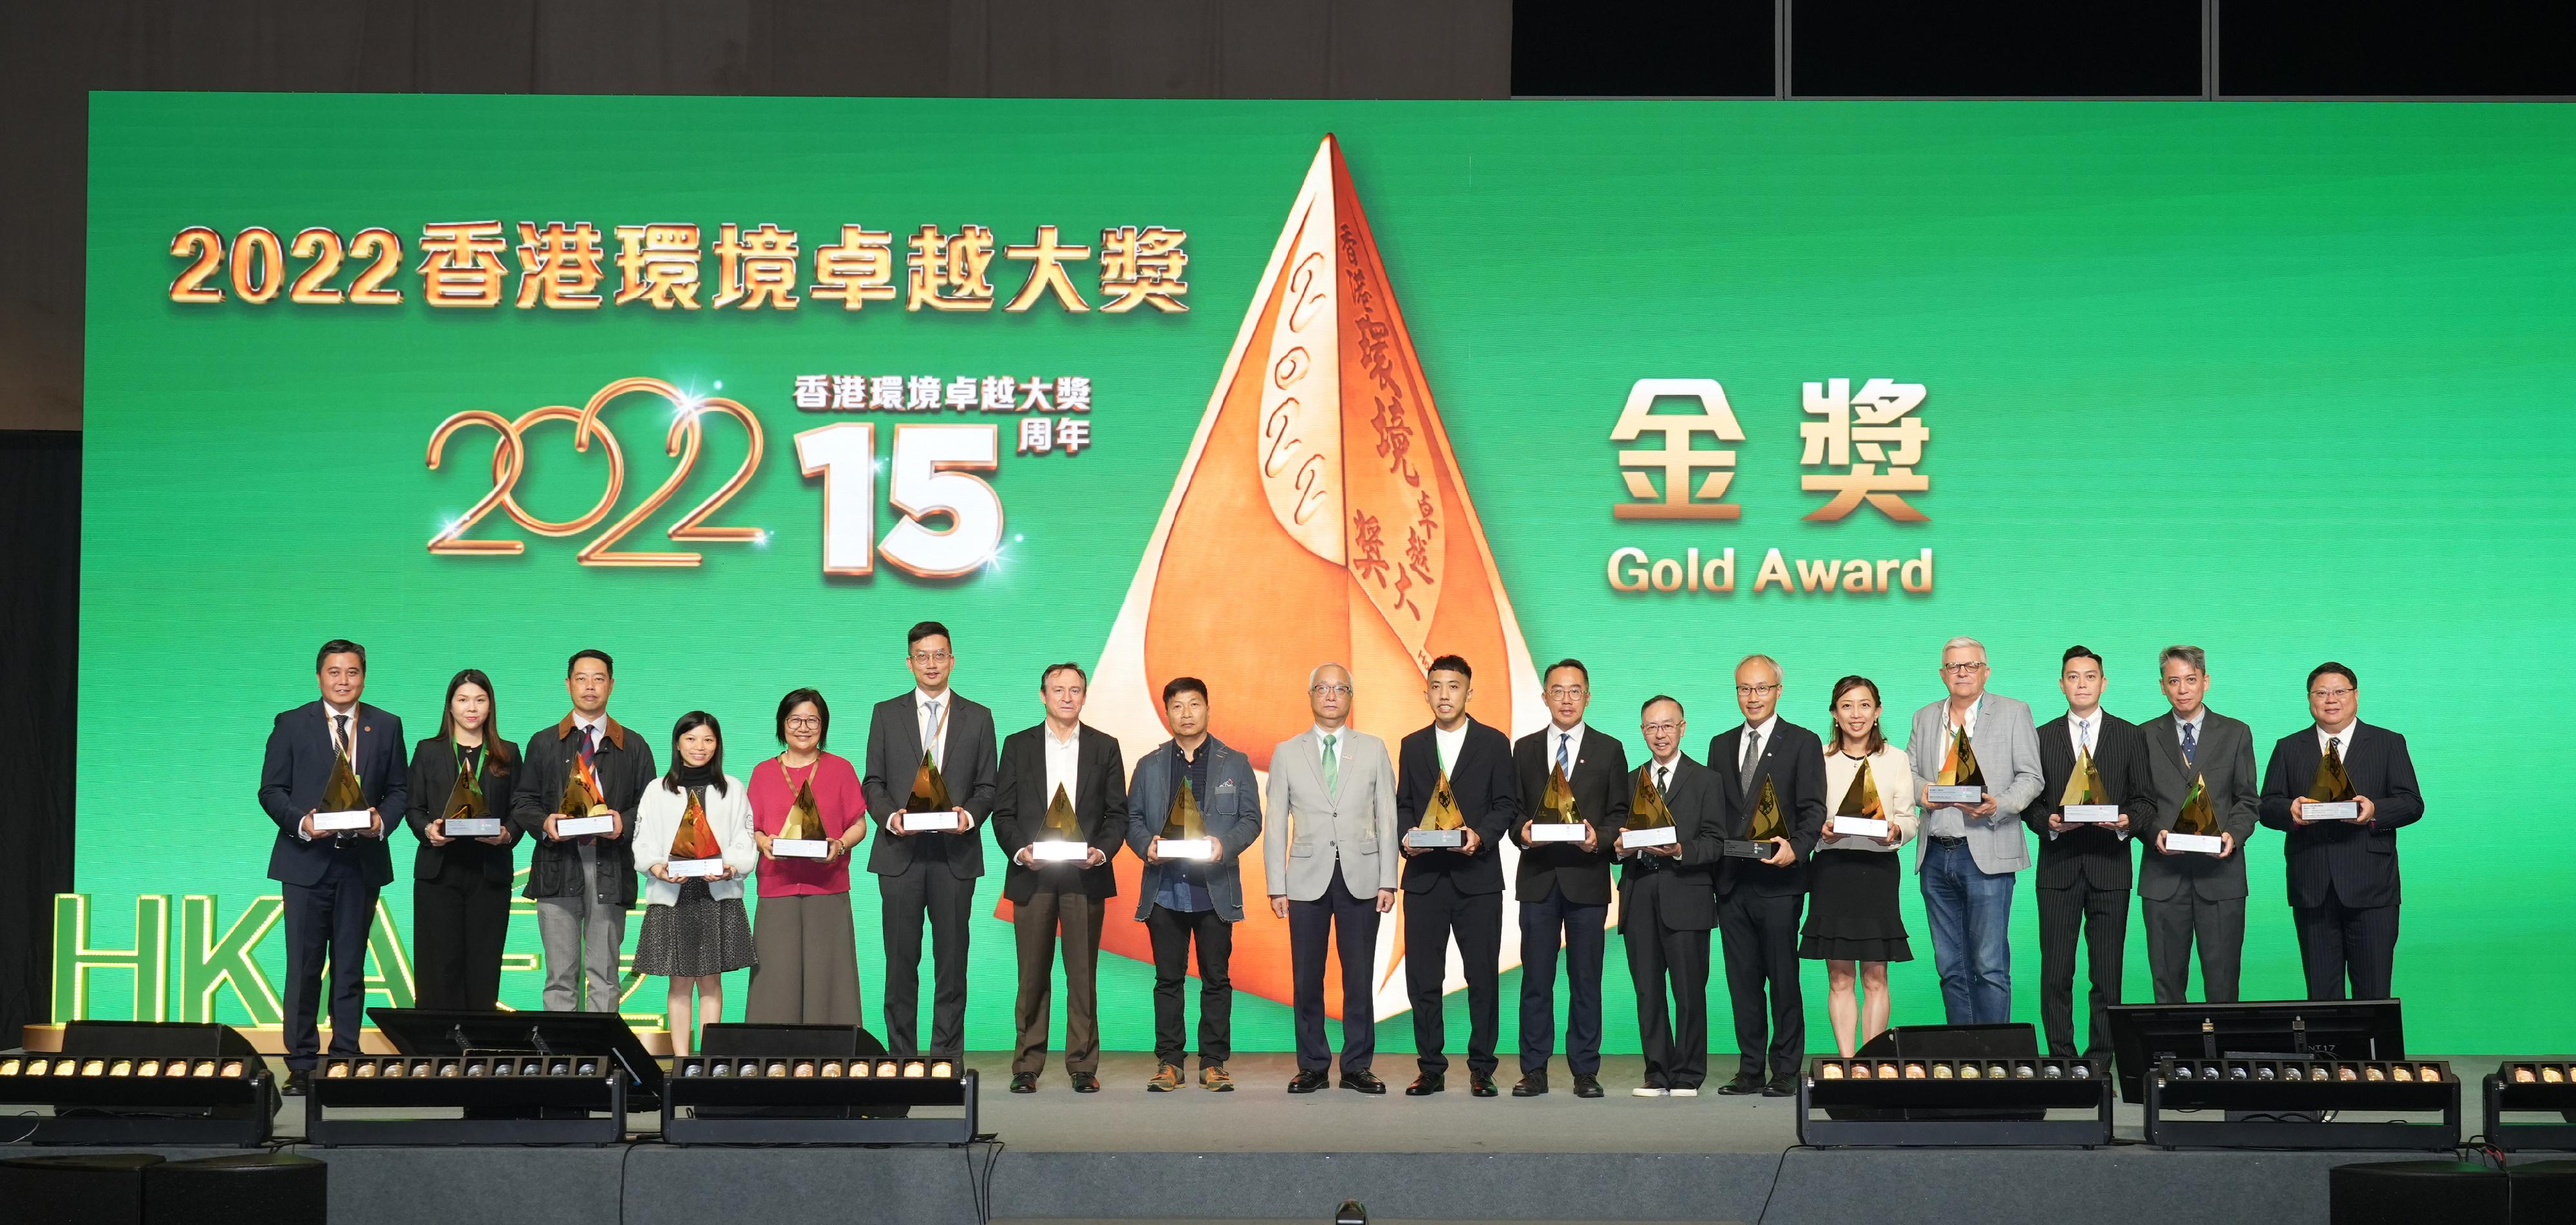 The Secretary for Environment and Ecology, Mr Tse Chin-wan, attended the 2022 Hong Kong Awards for Environmental Excellence (HKAEE) and Hong Kong Green Organisation Certification (HKGOC) Presentation Ceremony at the Hong Kong Convention and Exhibition Centre today (December 15). Photo shows Mr Tse (ninth left) and representatives of winning companies and organisations of the Gold Award of the HKAEE and the HKGOC.
